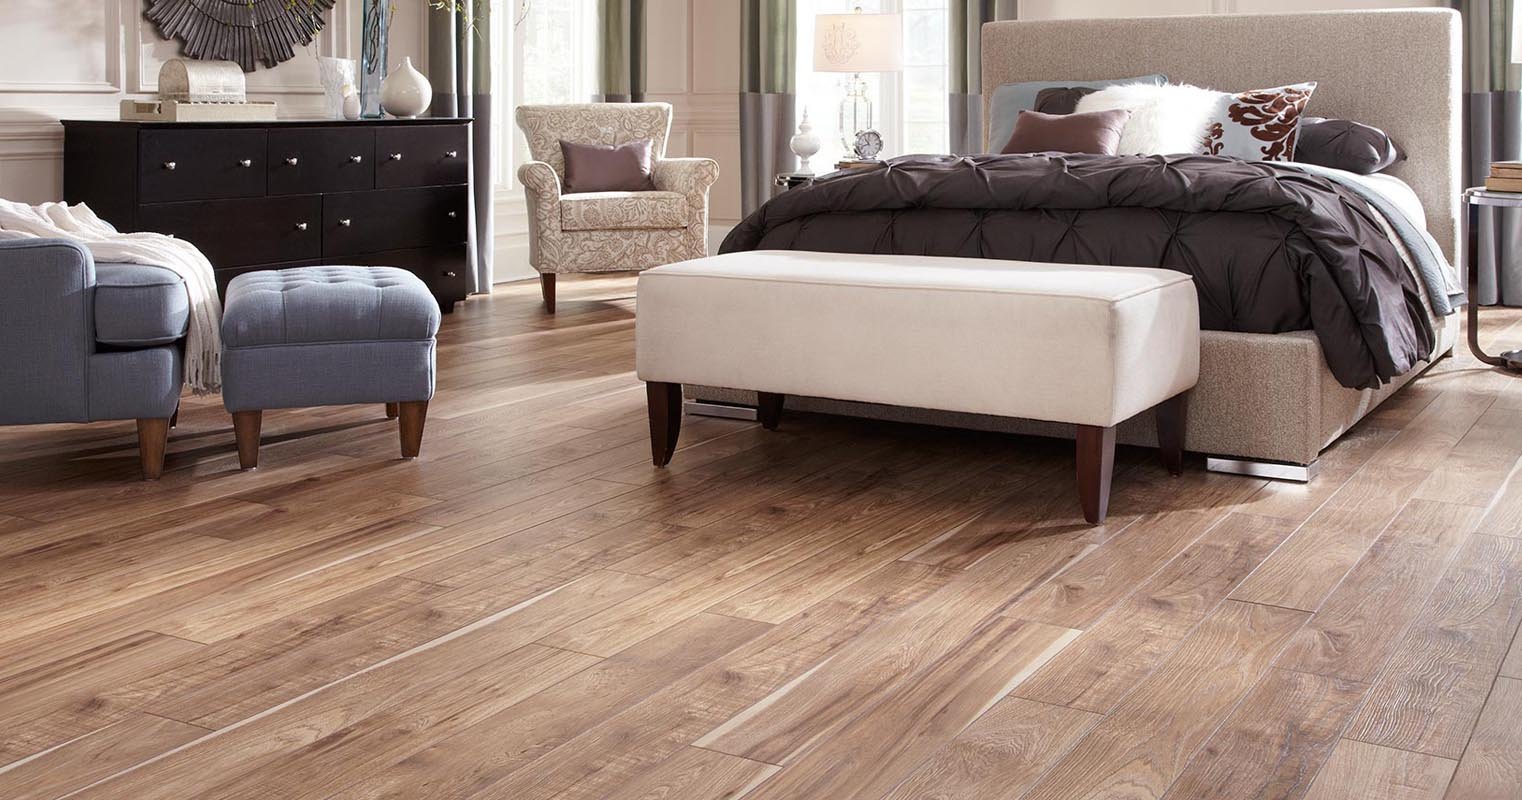 wooden flooring for home